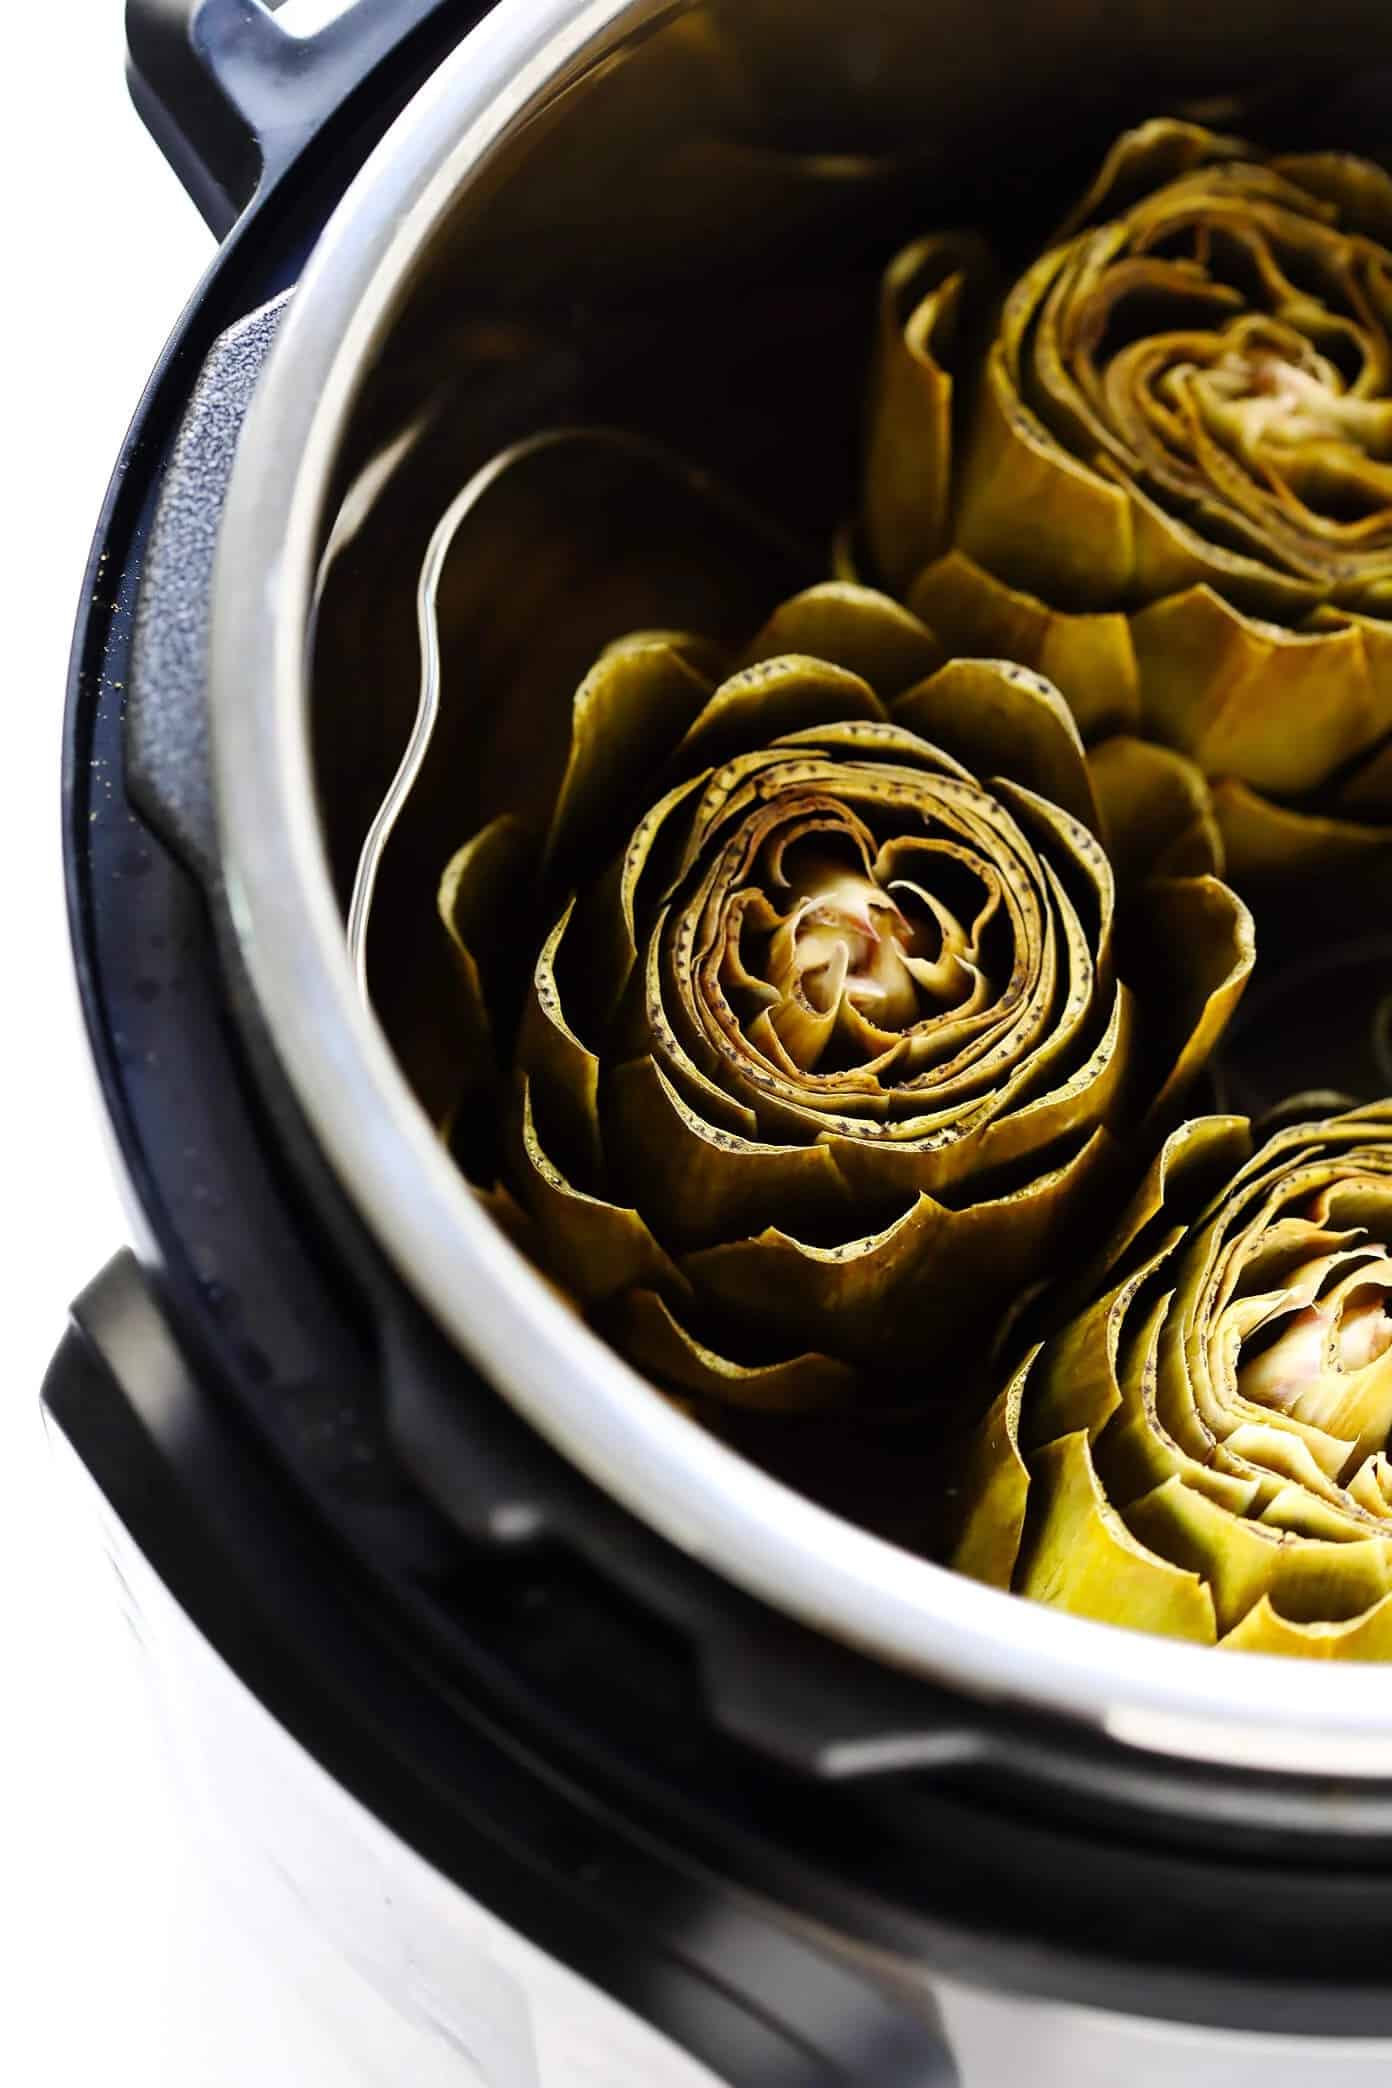 Whole trimmed artichokes shown in Instant Pot.